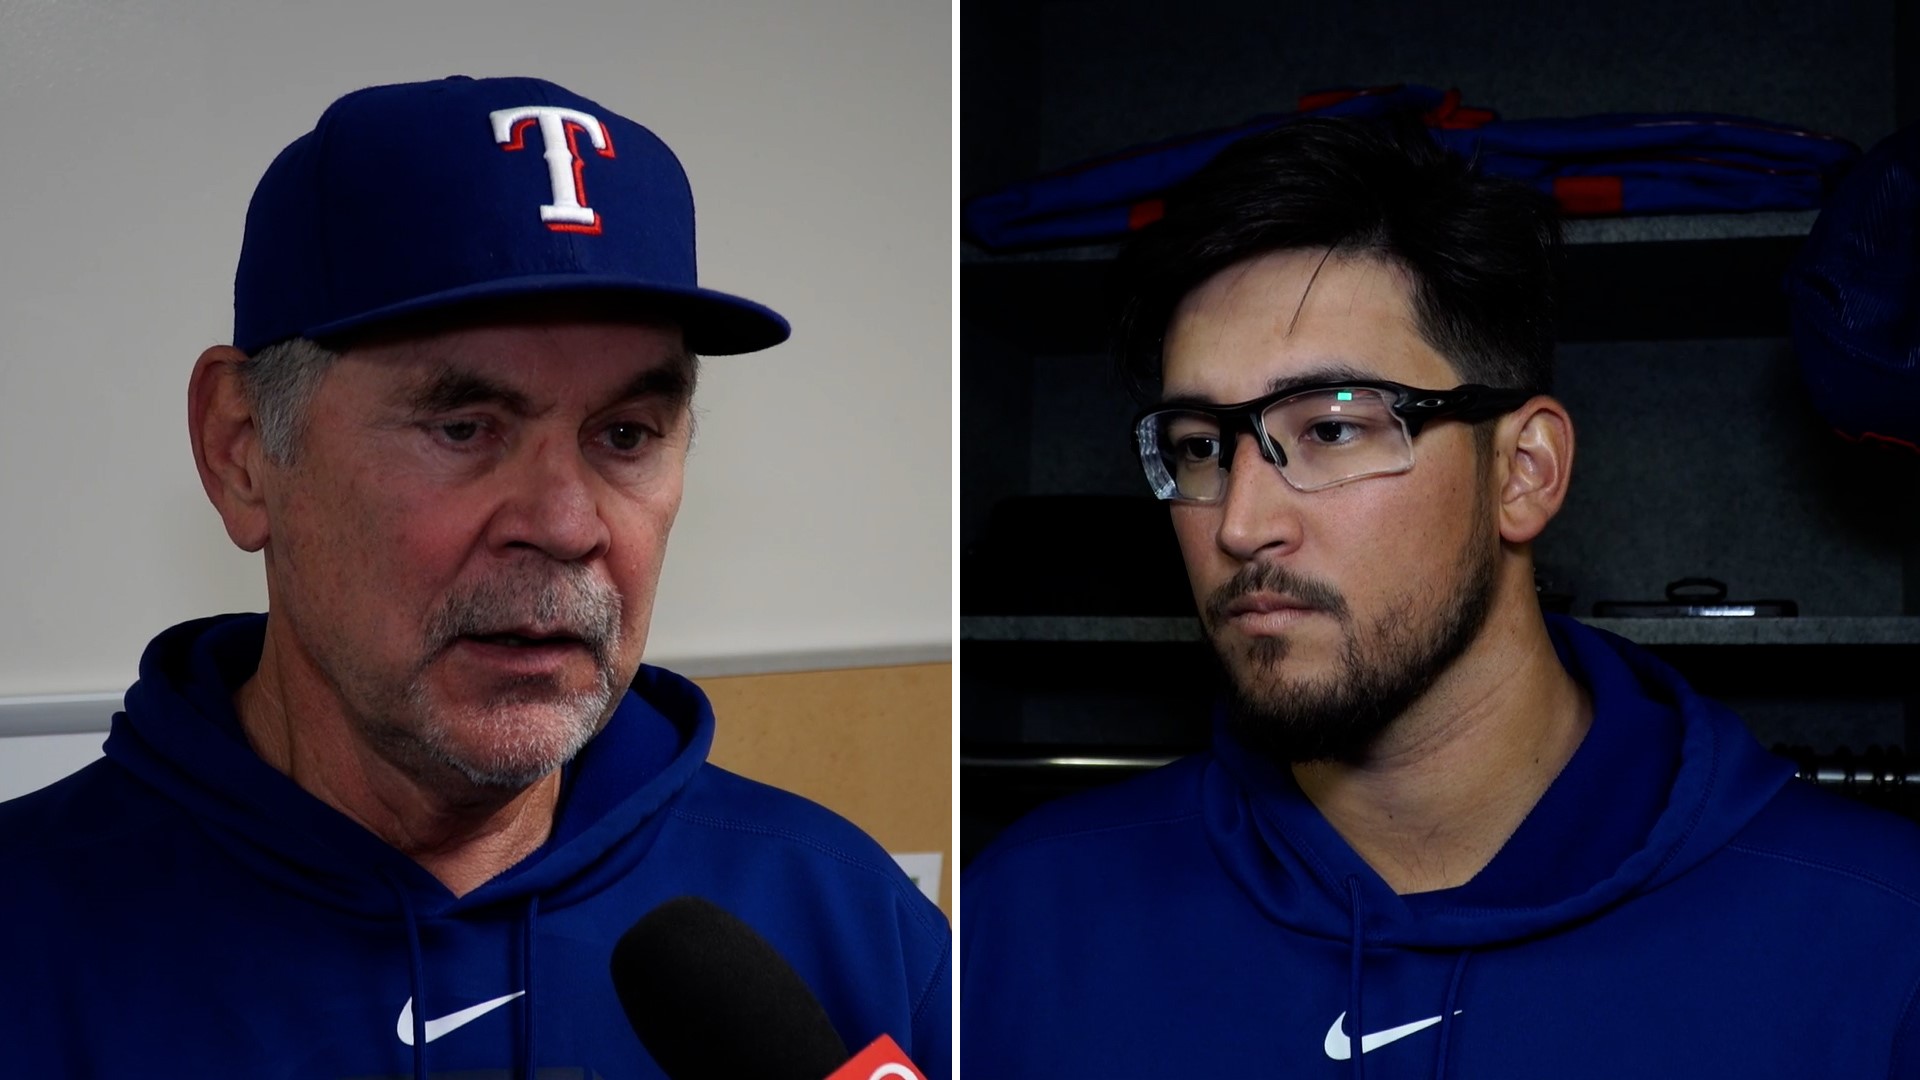 Bruce Bochy and Dane Dunning talk to the media following the Texas Rangers' 7th straight win.